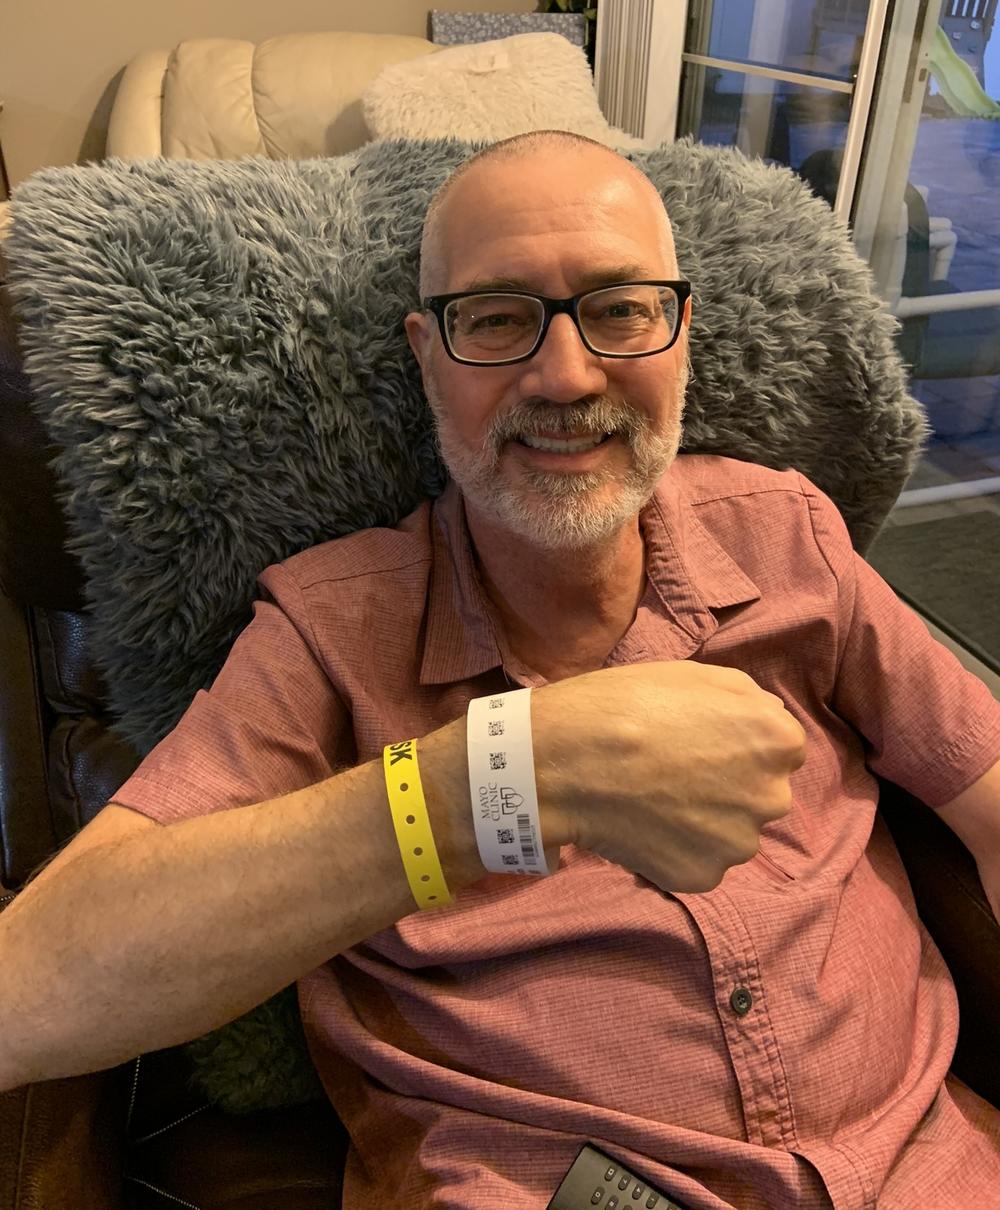 David Elder flashes his hospital bracelet from the comfort of an easy chair in his own home, which he was sent back to just a few hours after his bone marrow transplant surgery. He said it was a lot more restful to be home.